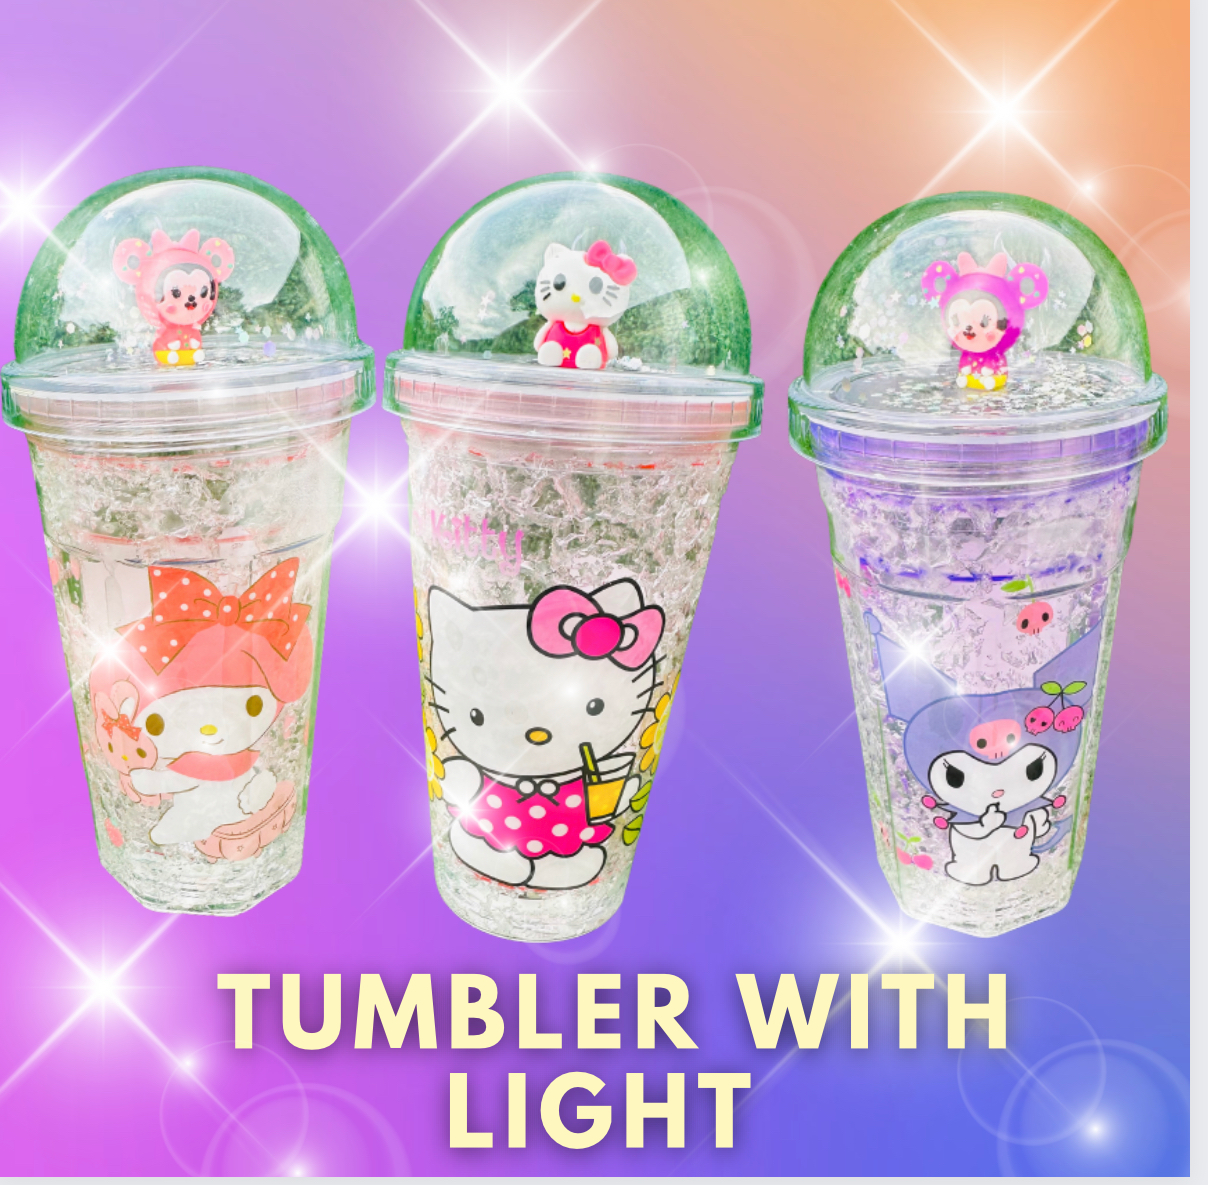 TUMBLER WITH LIGHT